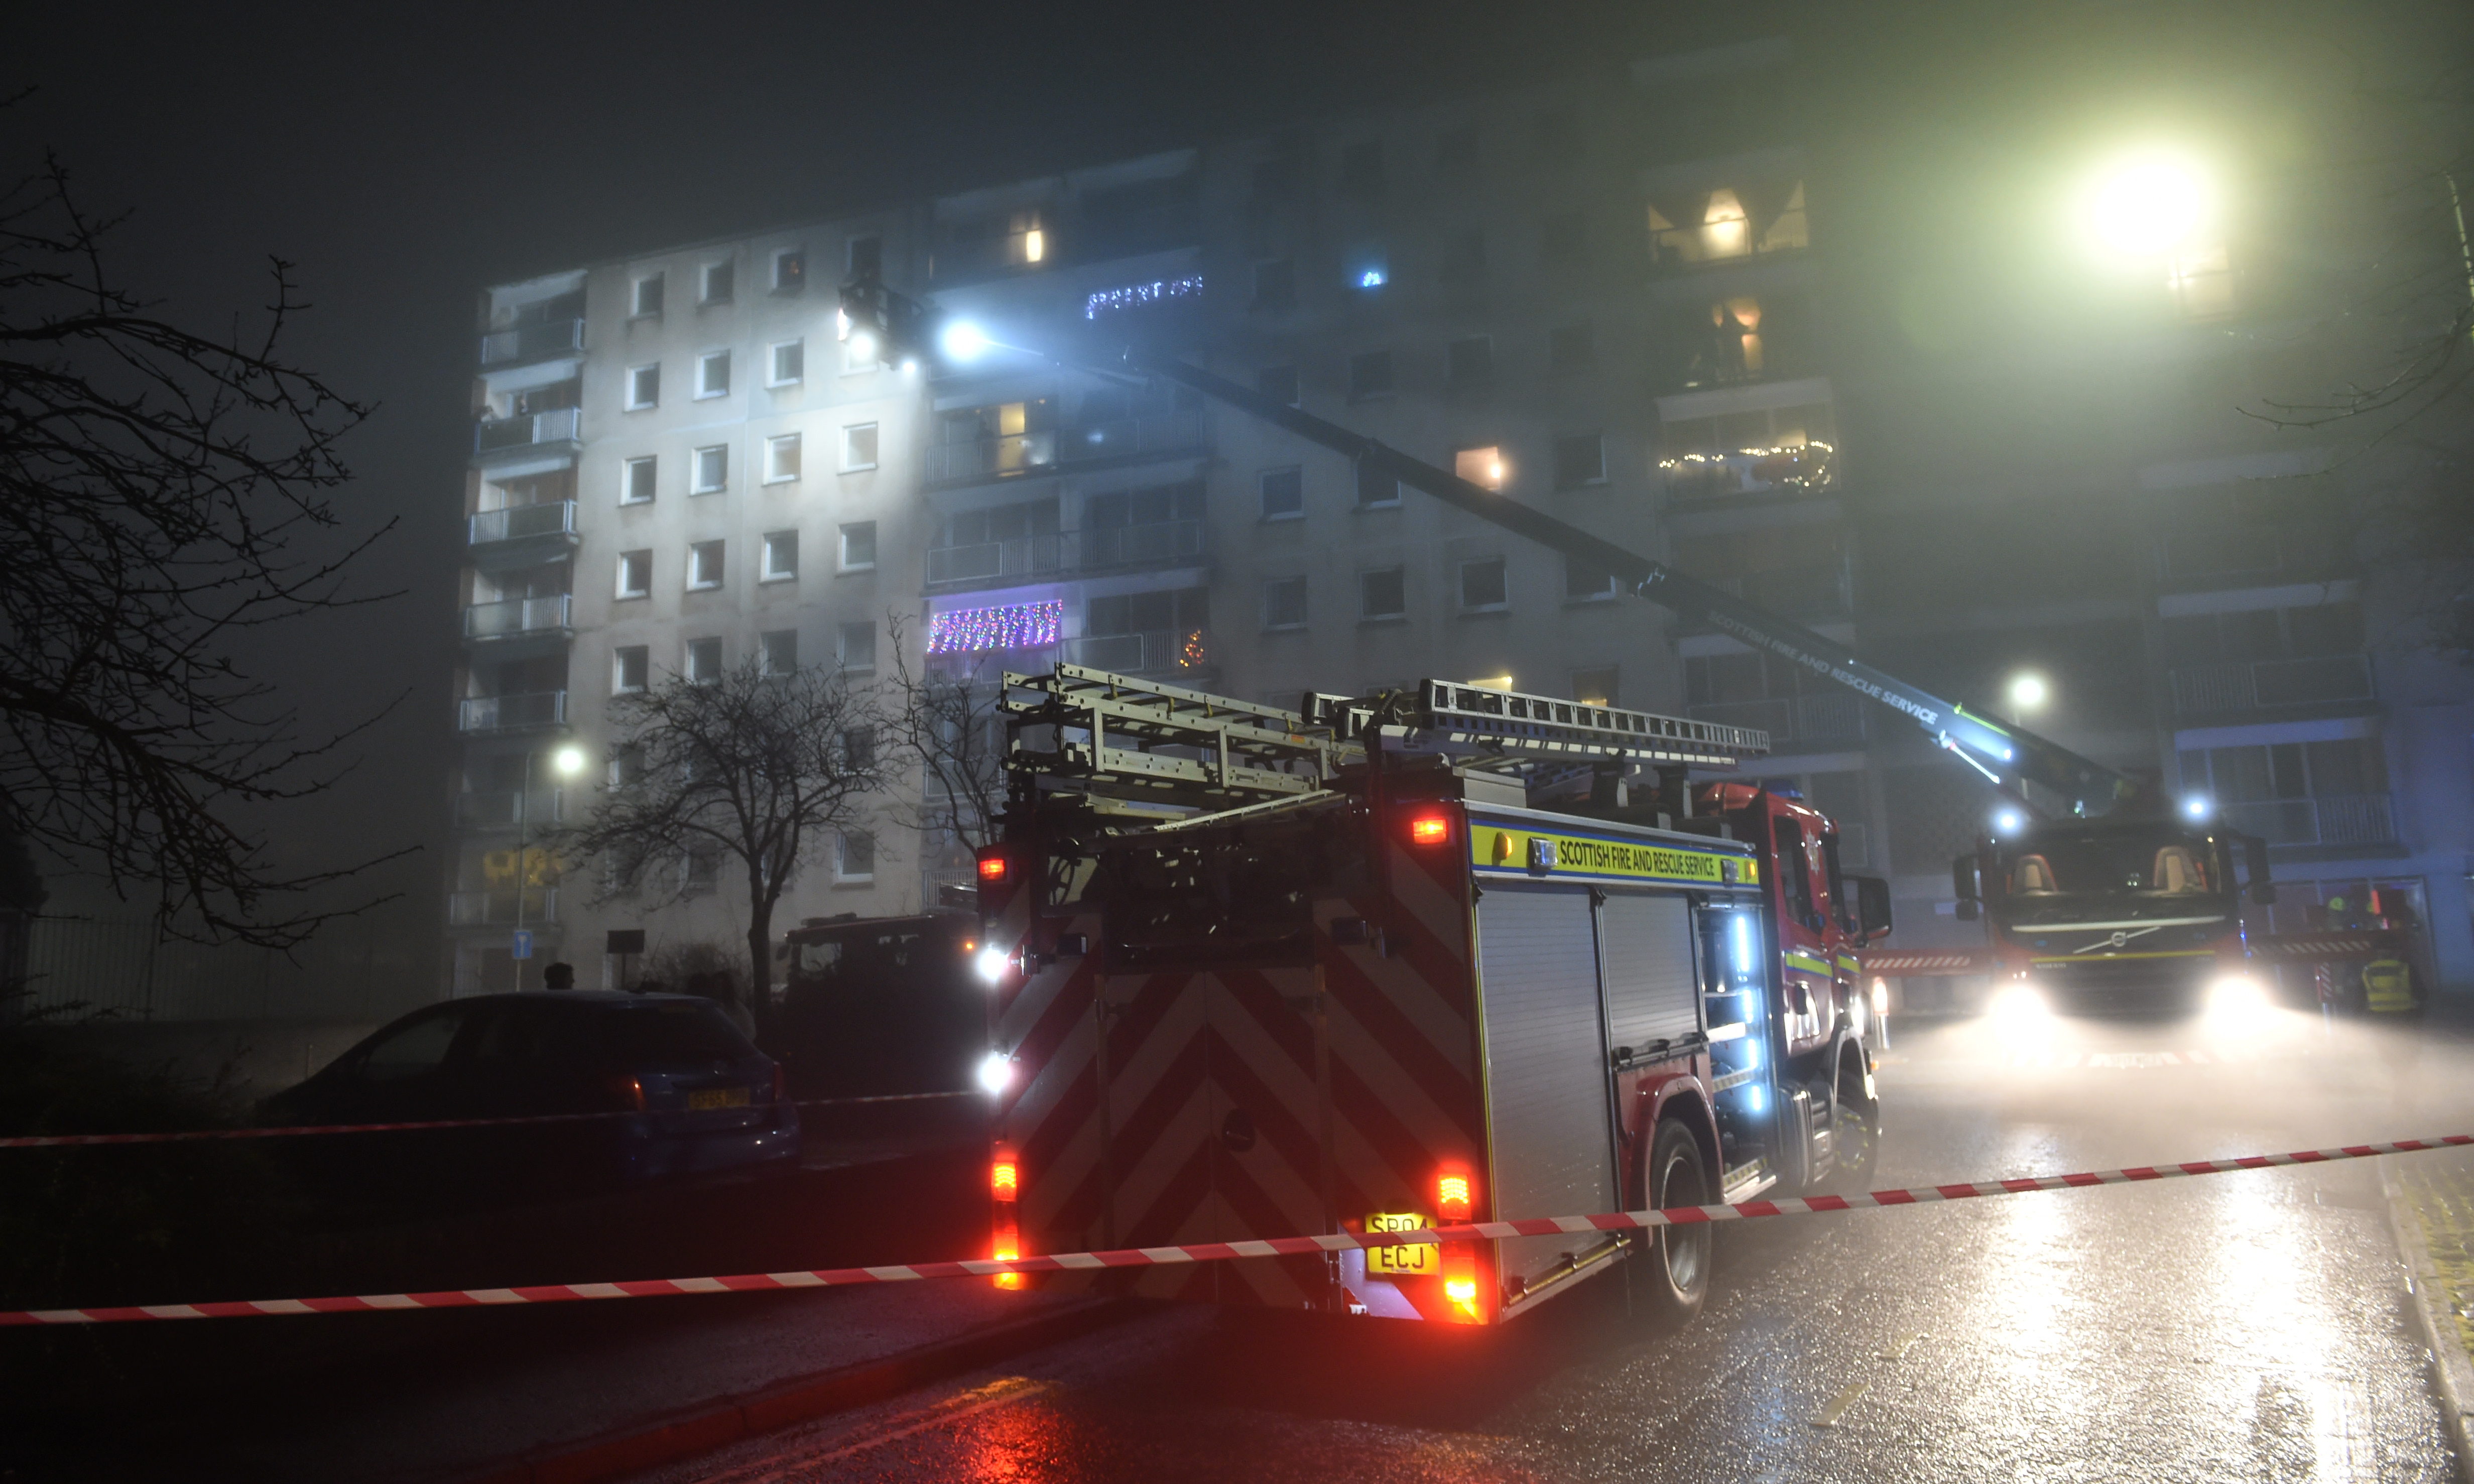 Flats in Pomarium Street were evacuated as firefighters tackled the blaze.